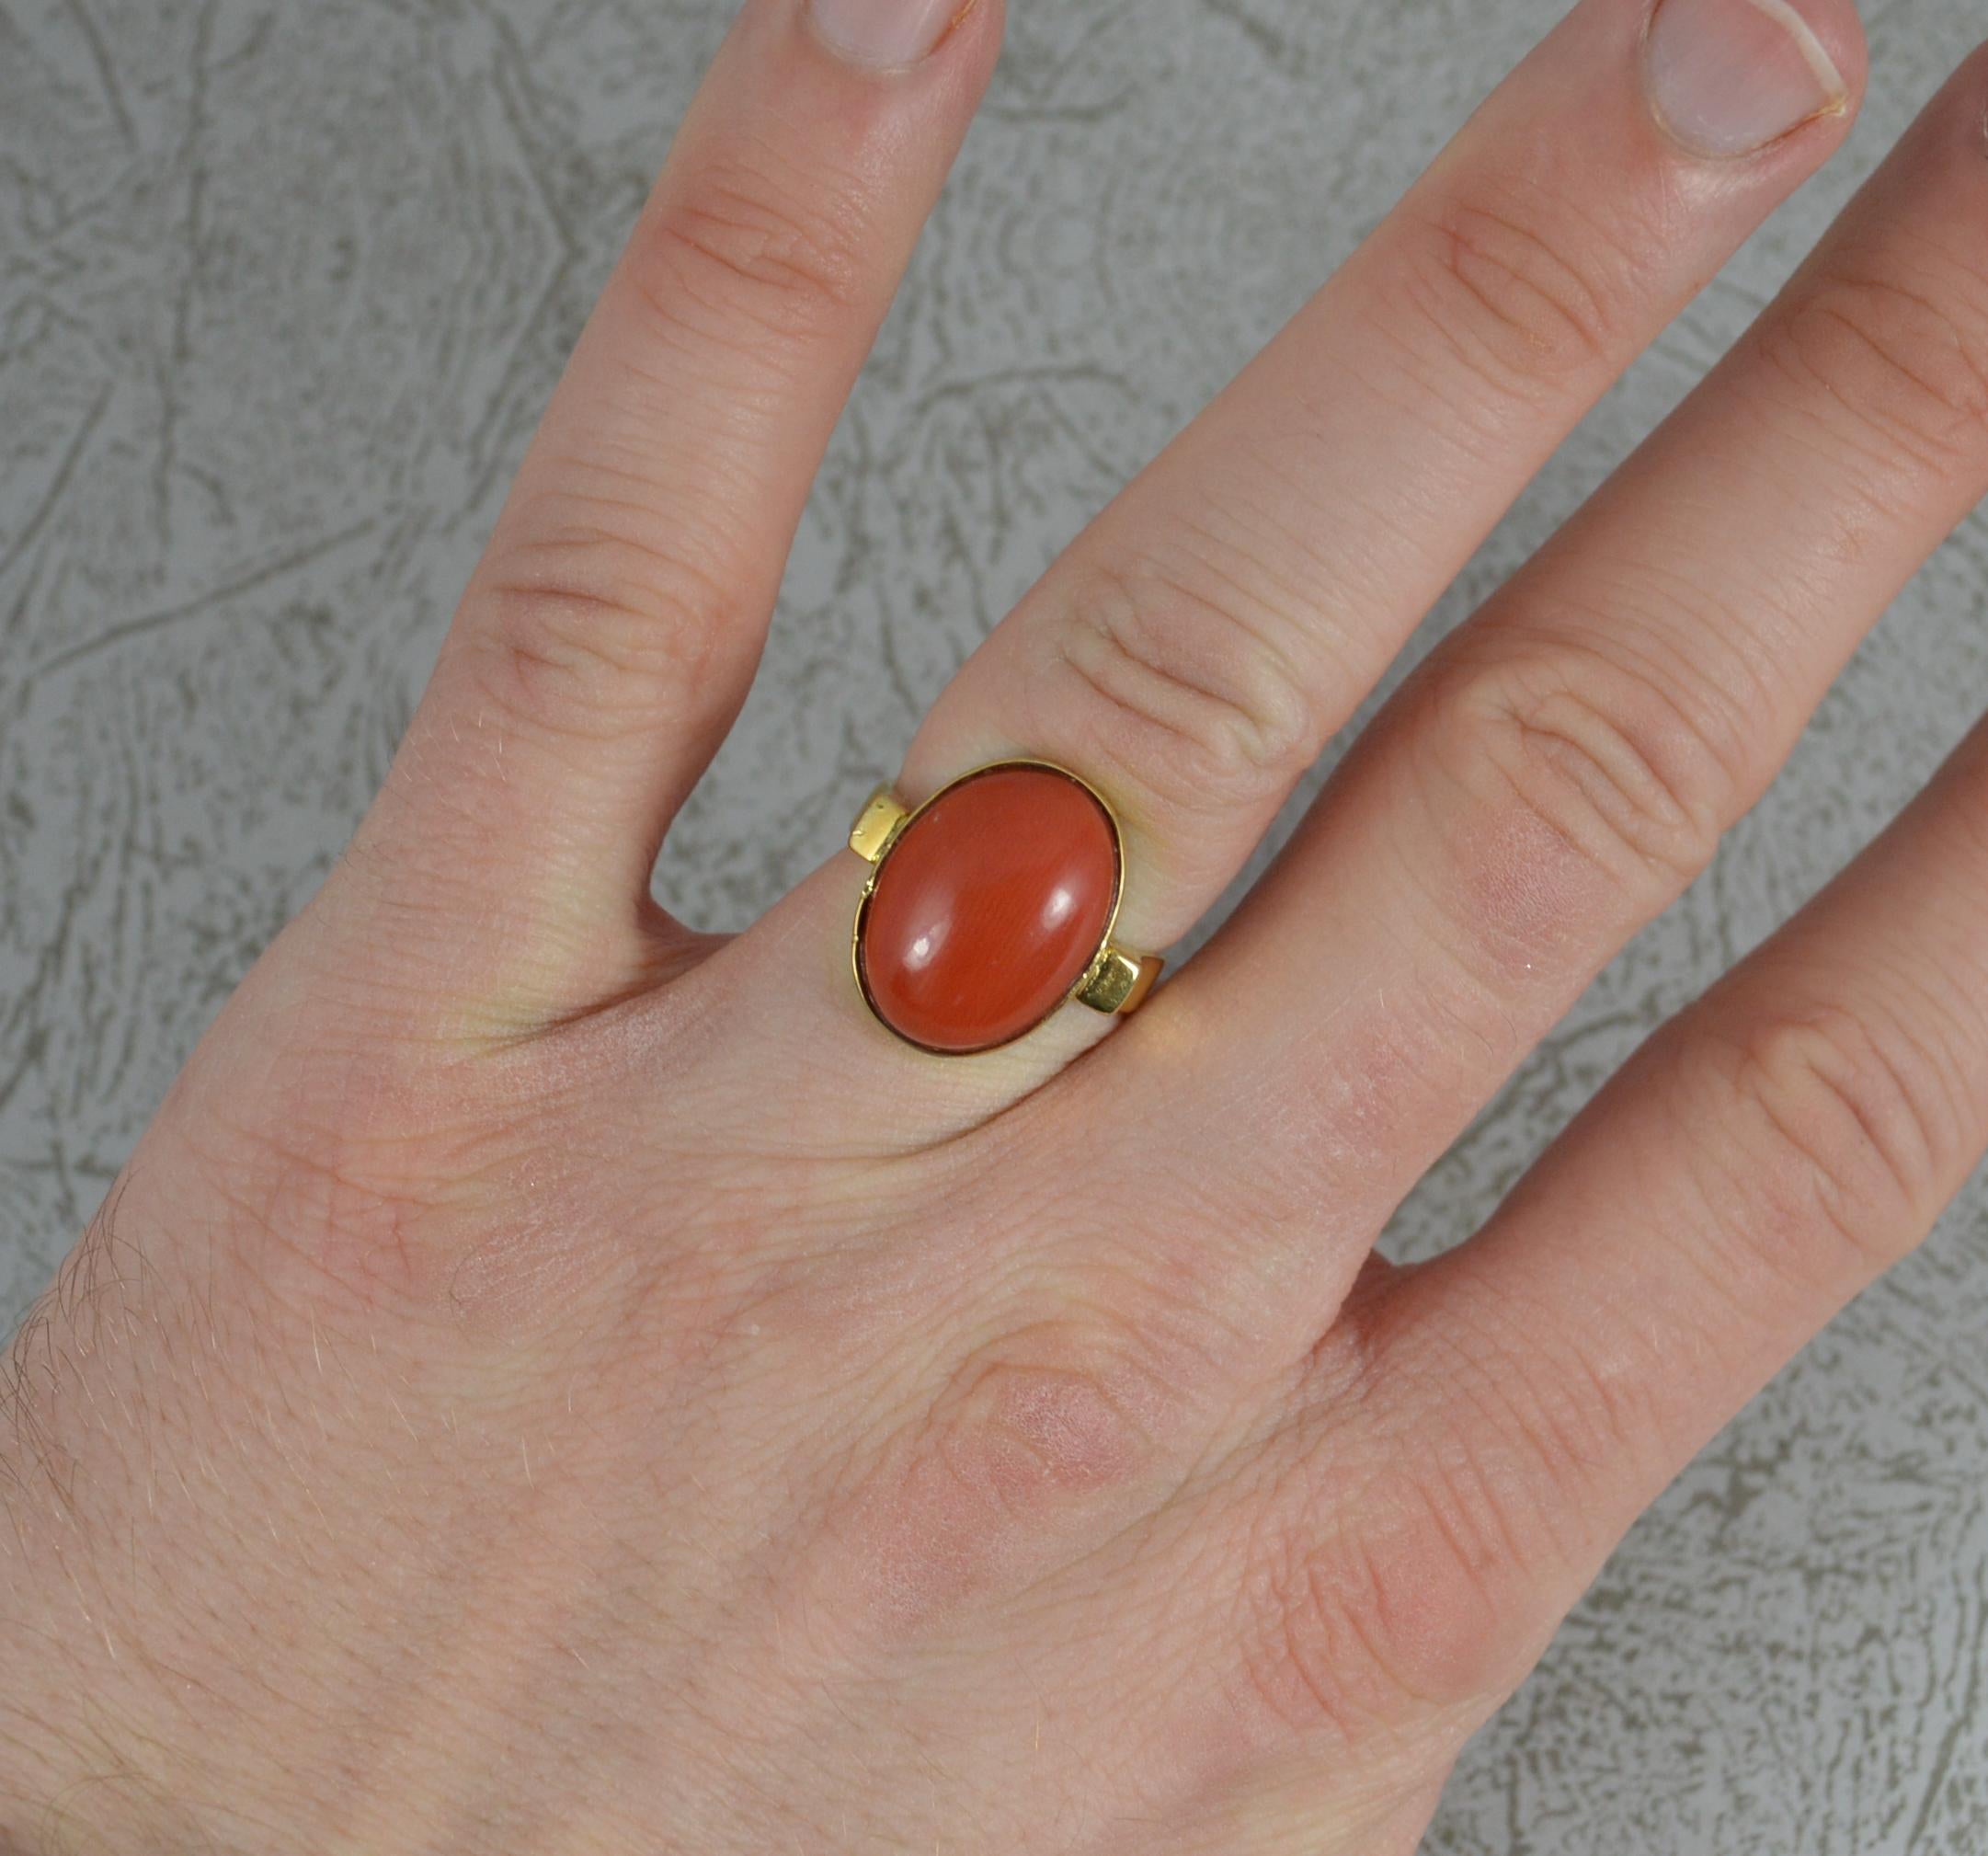 A beautiful vintage retro ring.
Solid 18 carat yellow gold example.
Designed holding one single oval shaped coral. 12mm x 16mm coral. 
Made with split shoulders and a fine plain gold head setting.

CONDITION ; Very good. Clean, solid band. Securely